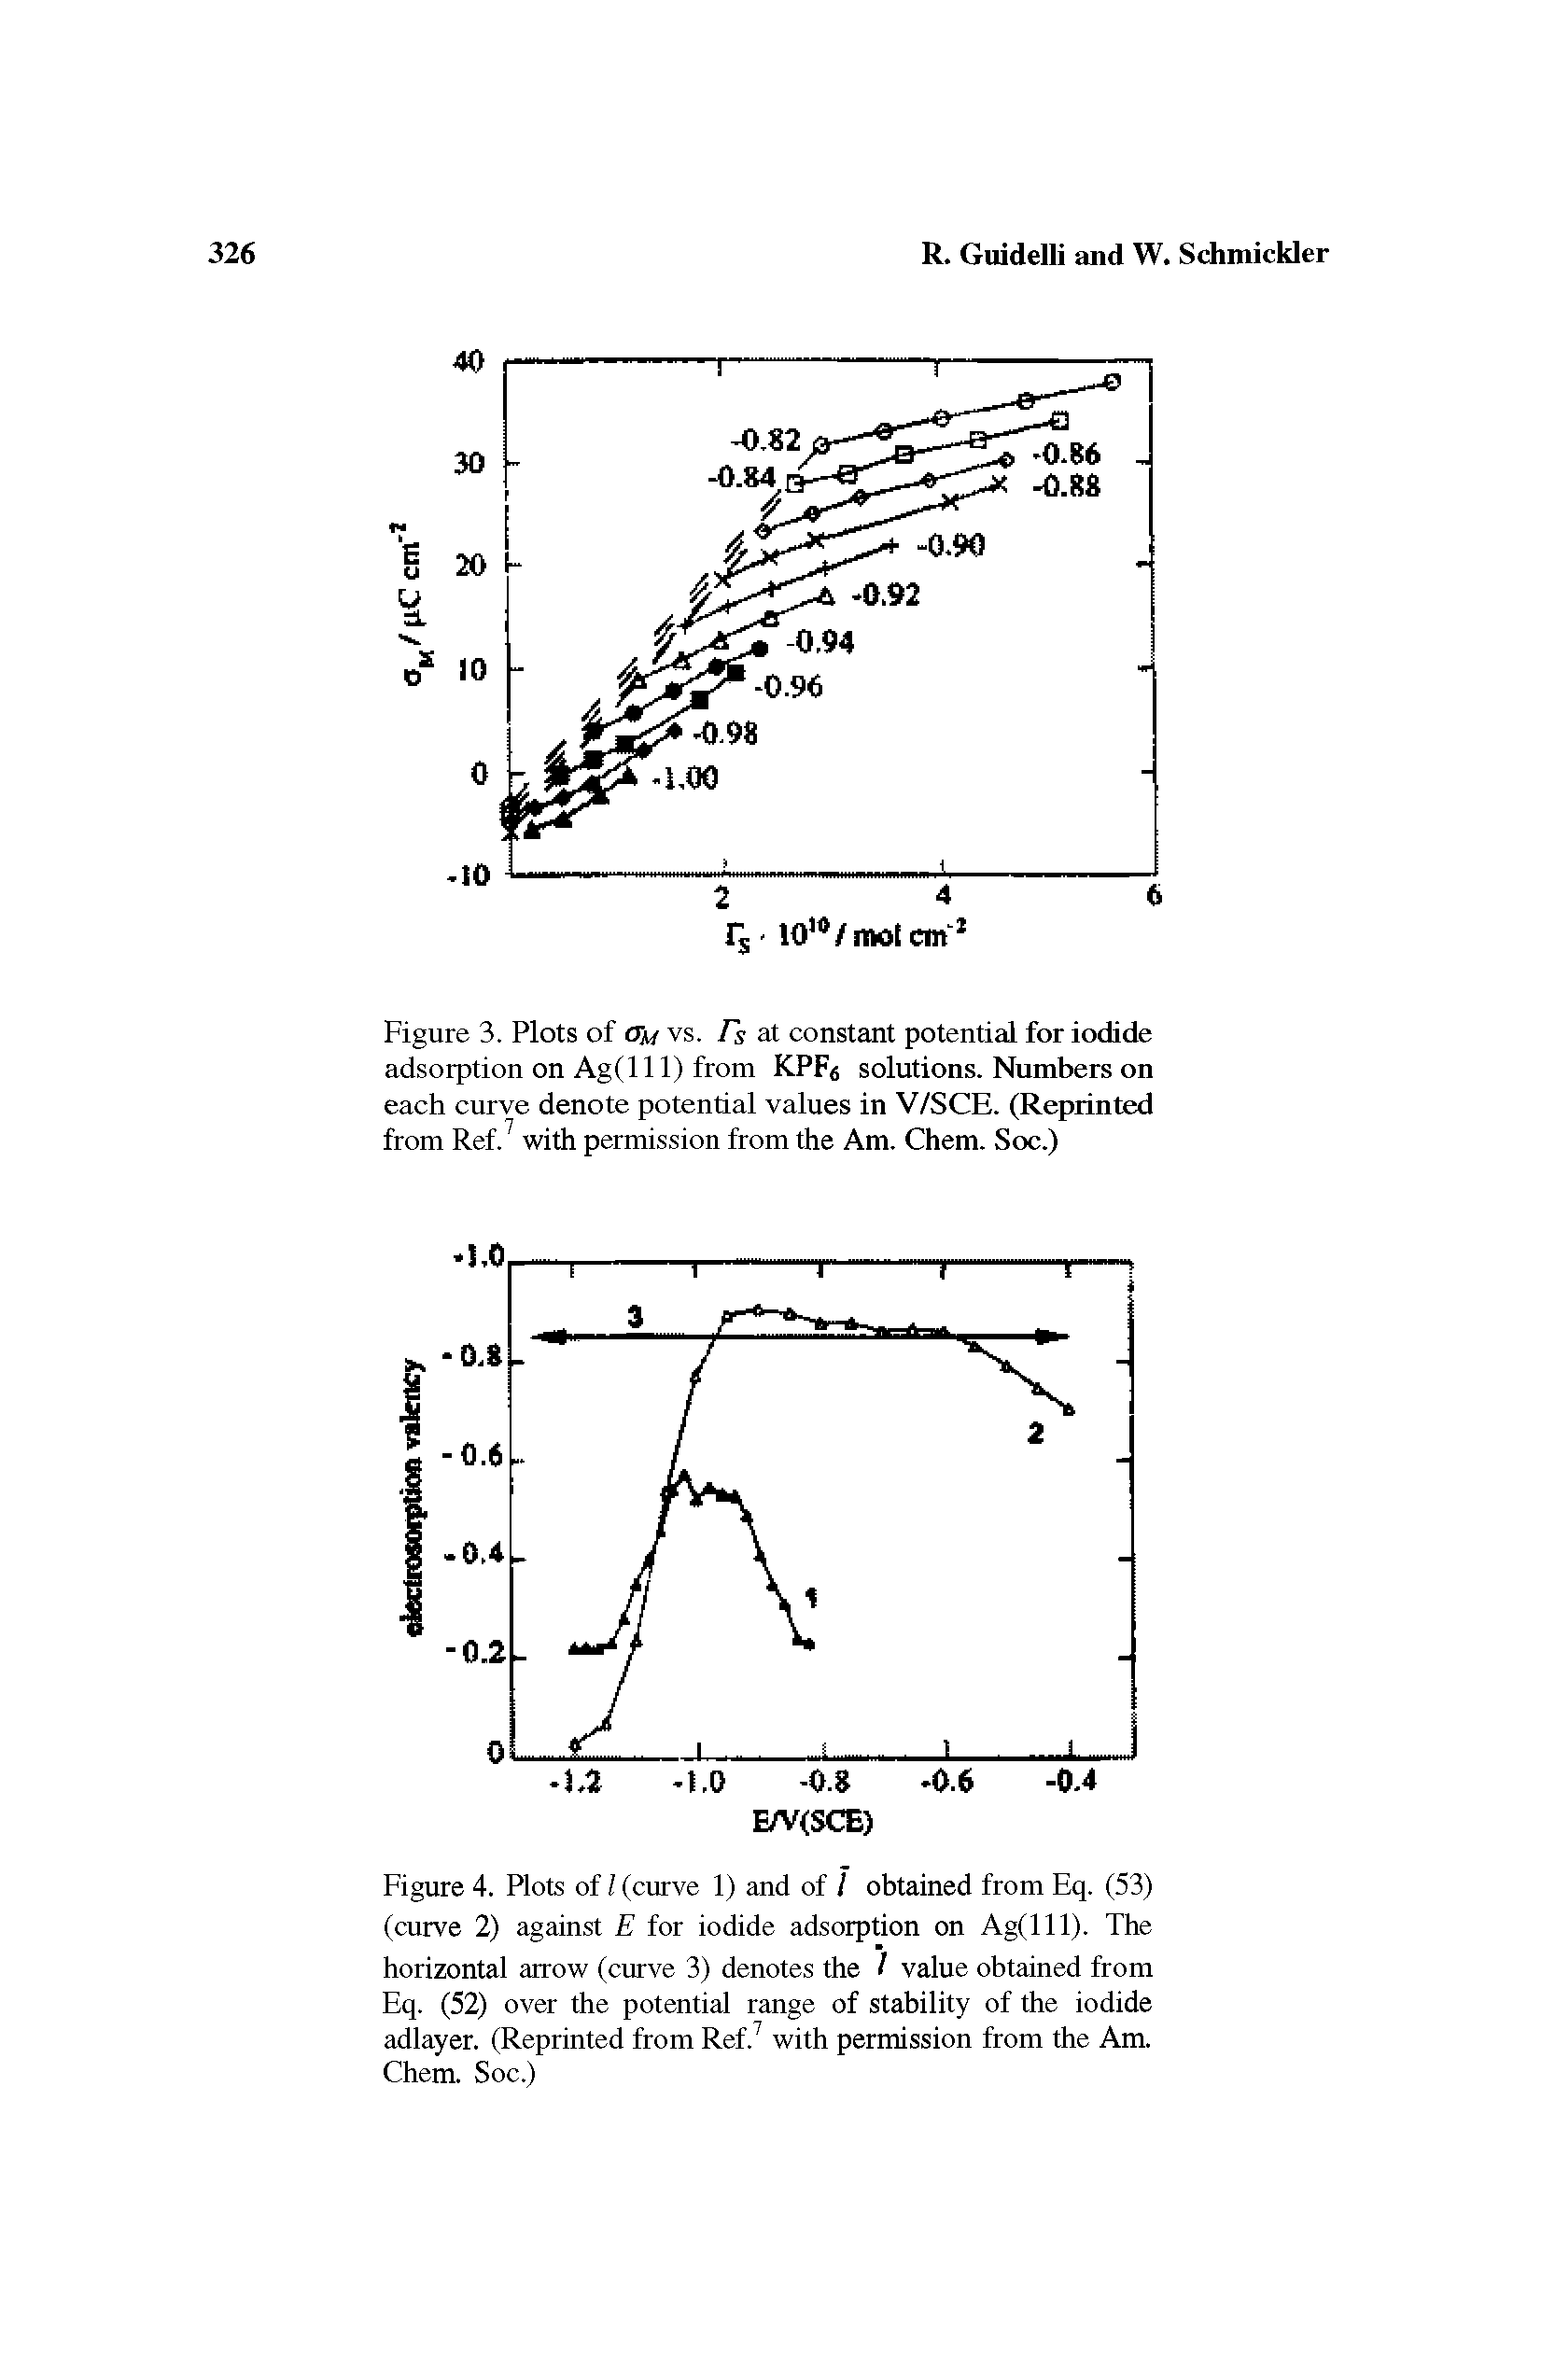 Figure 3. Plots of Om vs. /s at constant potential for iodide adsorption on Ag(l 11) from KPF solutions. Numbers on each curve denote potential values in V/SCE. (Reprinted from Ref.7 with permission from the Am. Chem. Soc.)...